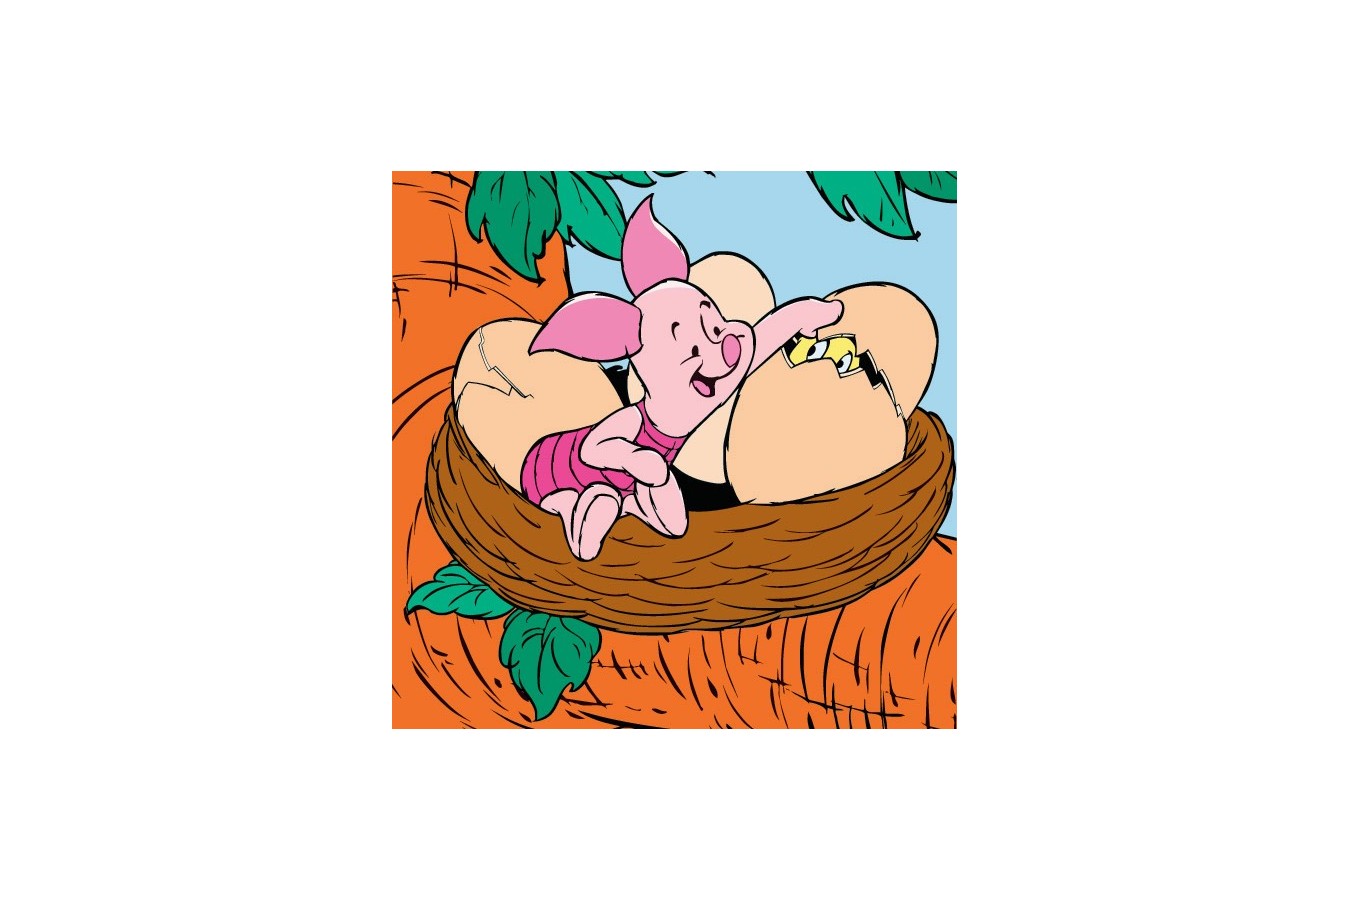 Puzzle Ravensburger - Winnie The Pooh, 6/9/12/16 piese (07123)